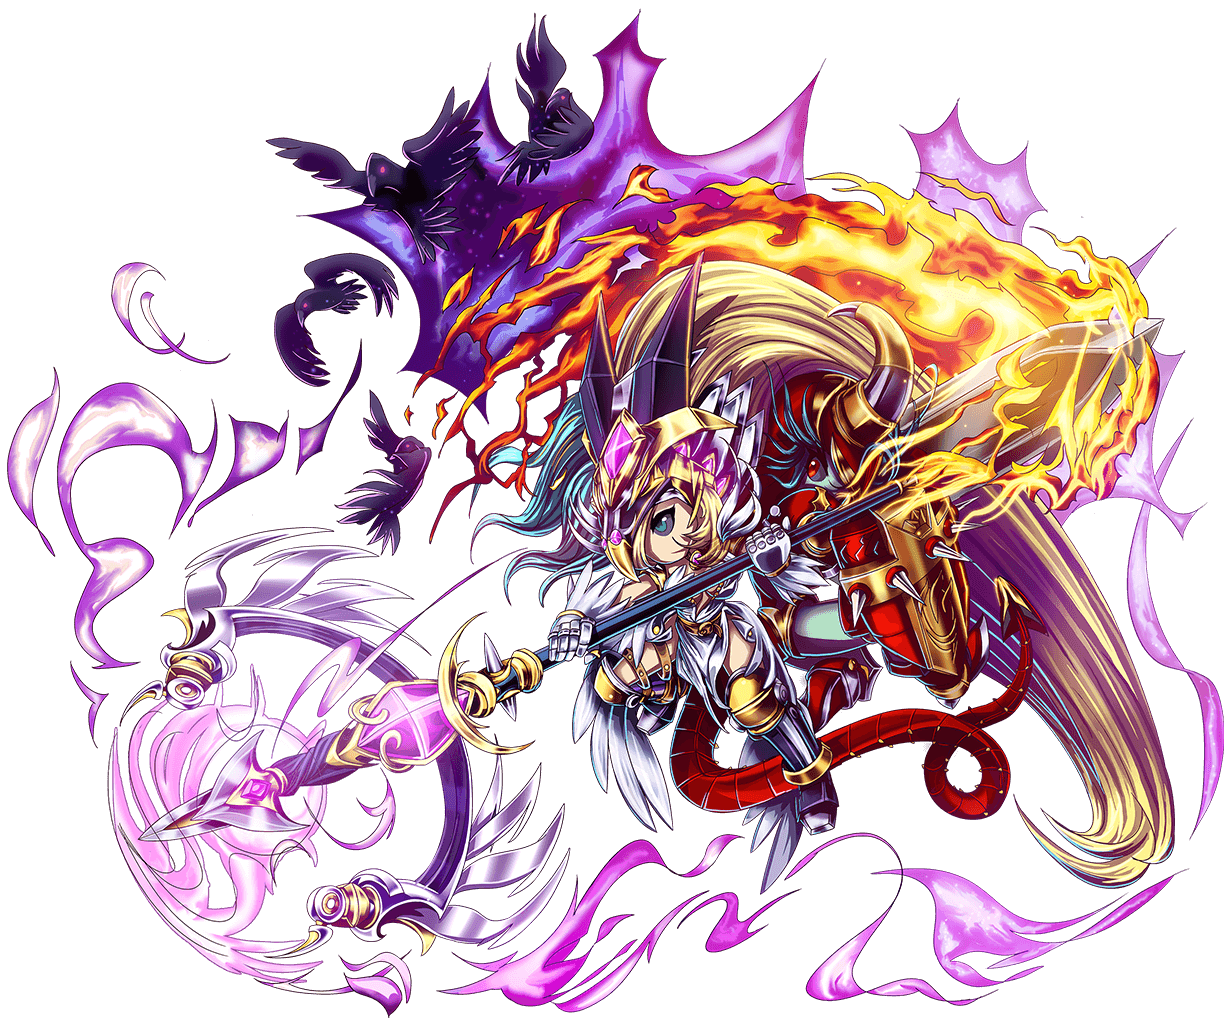 Brave frontier devious ebony and enid